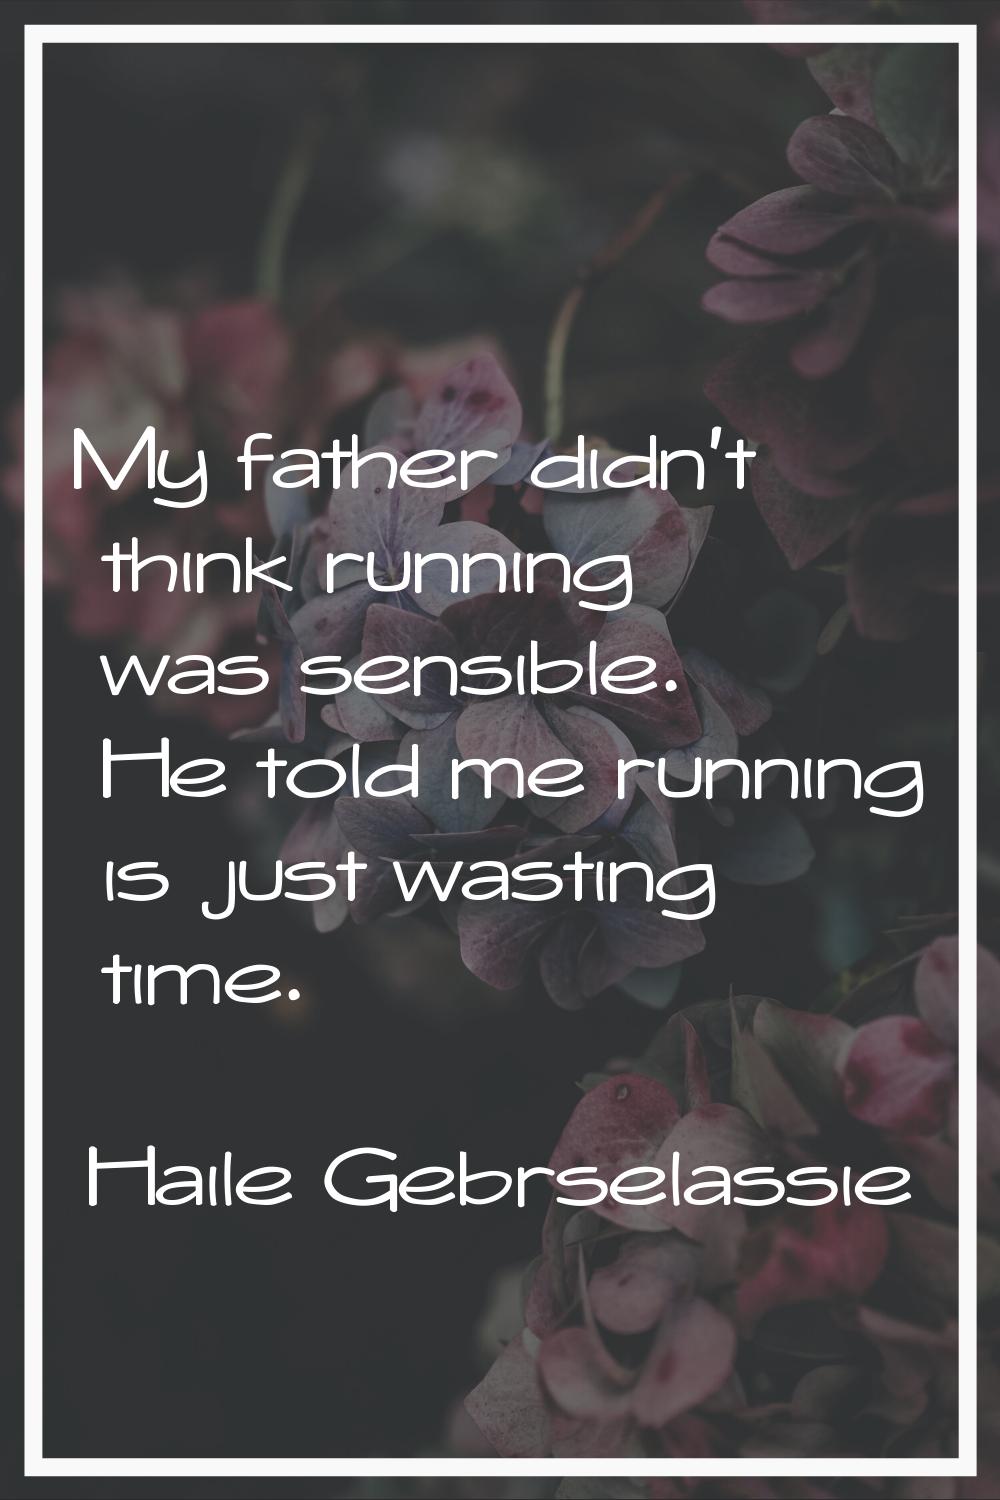 My father didn't think running was sensible. He told me running is just wasting time.